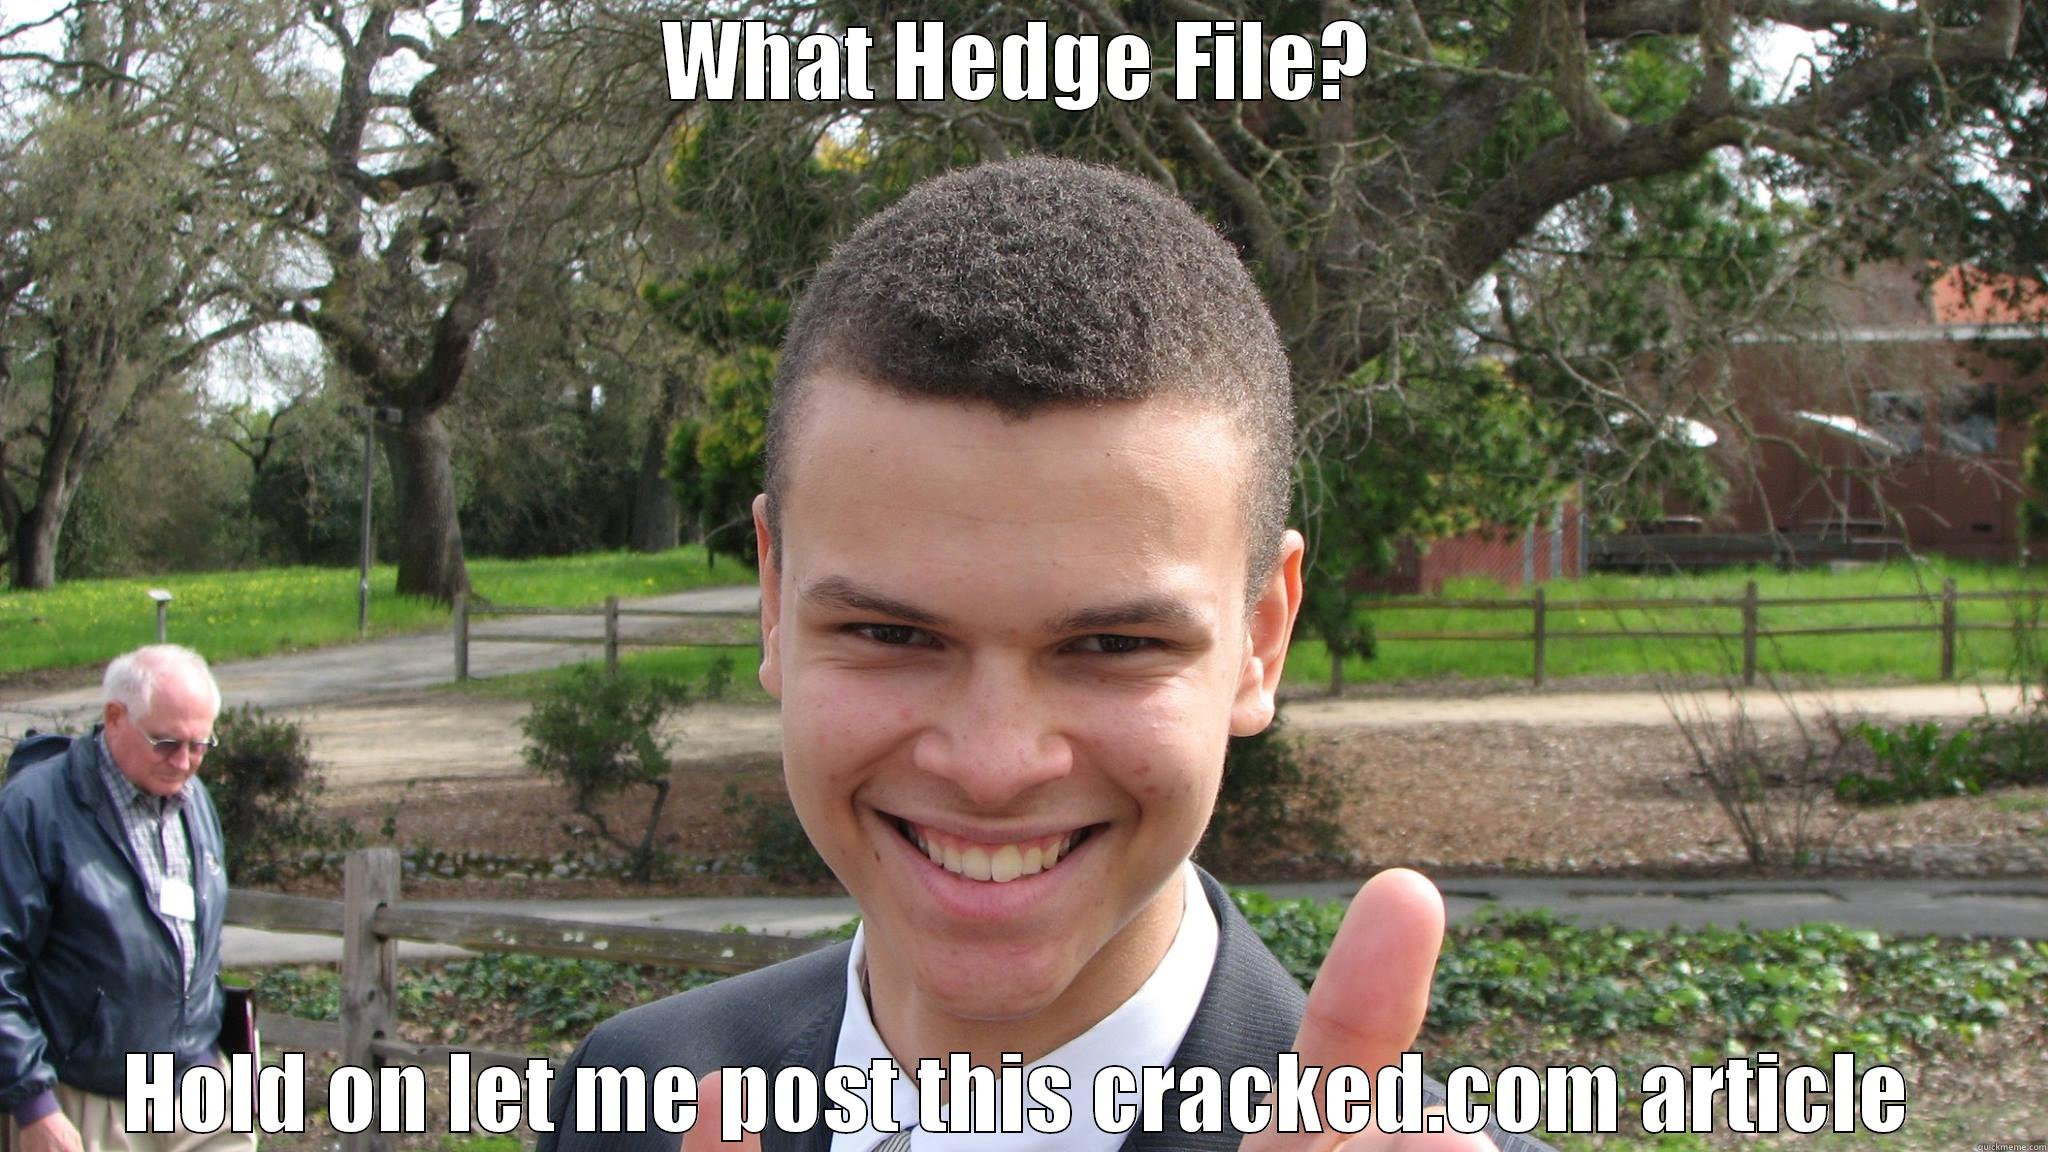   - WHAT HEDGE FILE? HOLD ON LET ME POST THIS CRACKED.COM ARTICLE Misc